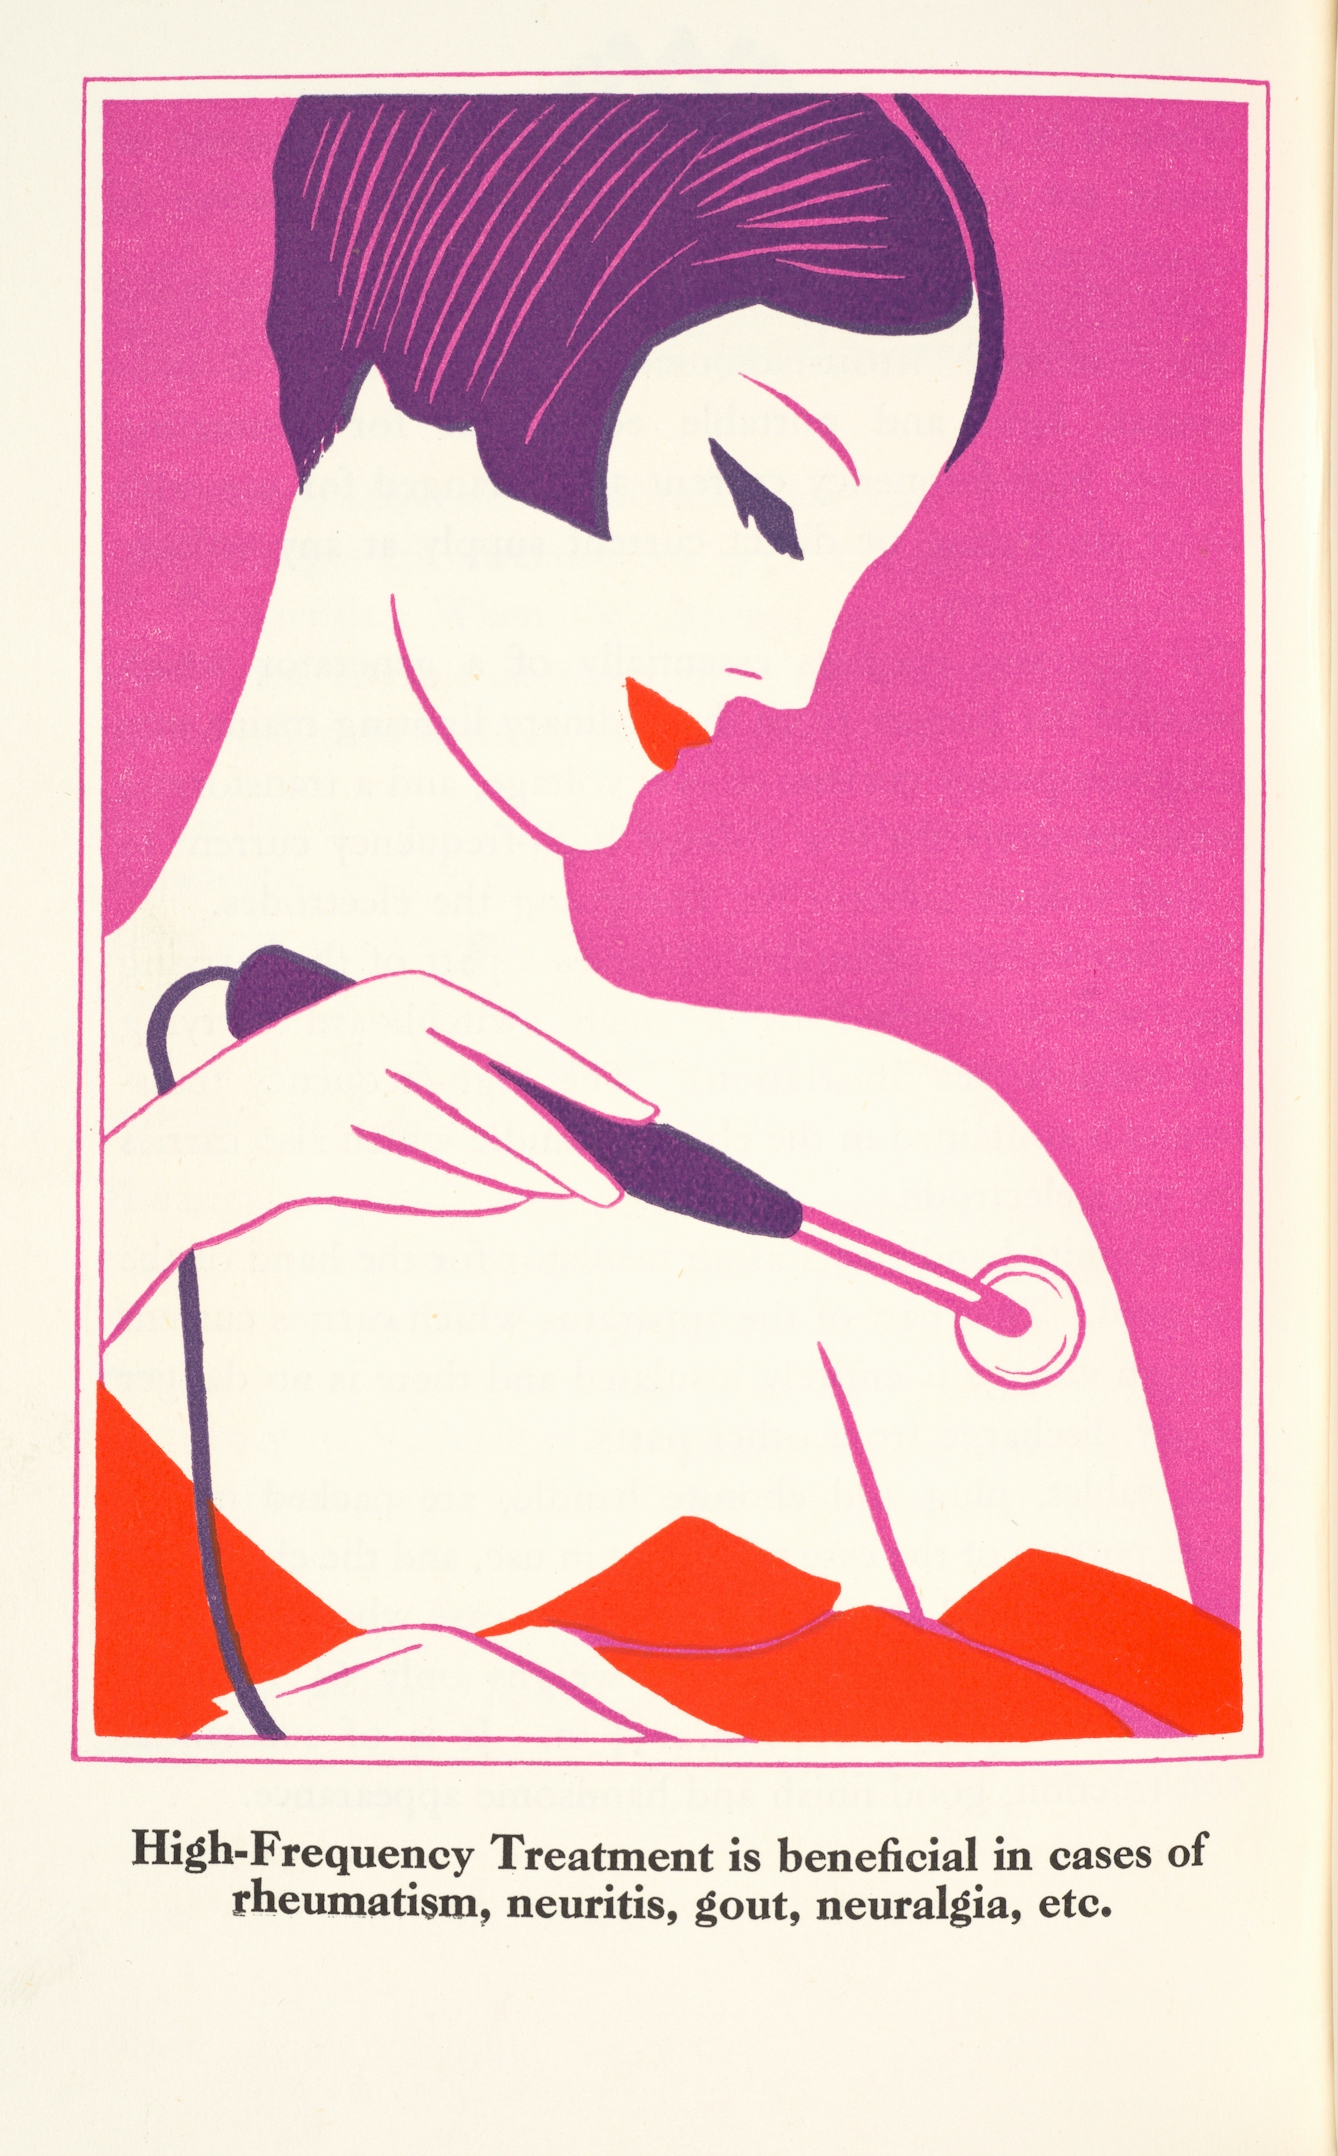 Photograph of a page from an illustrated booklet. The illustration in red, purple and violet shows the head and shoulders of a woman holding a wired handheld device against her upper arm. The image is captioned, 'High-frequency Treatment is beneficial inc cases of rheumatism, neuritis, gout, neuralgia,etc.'